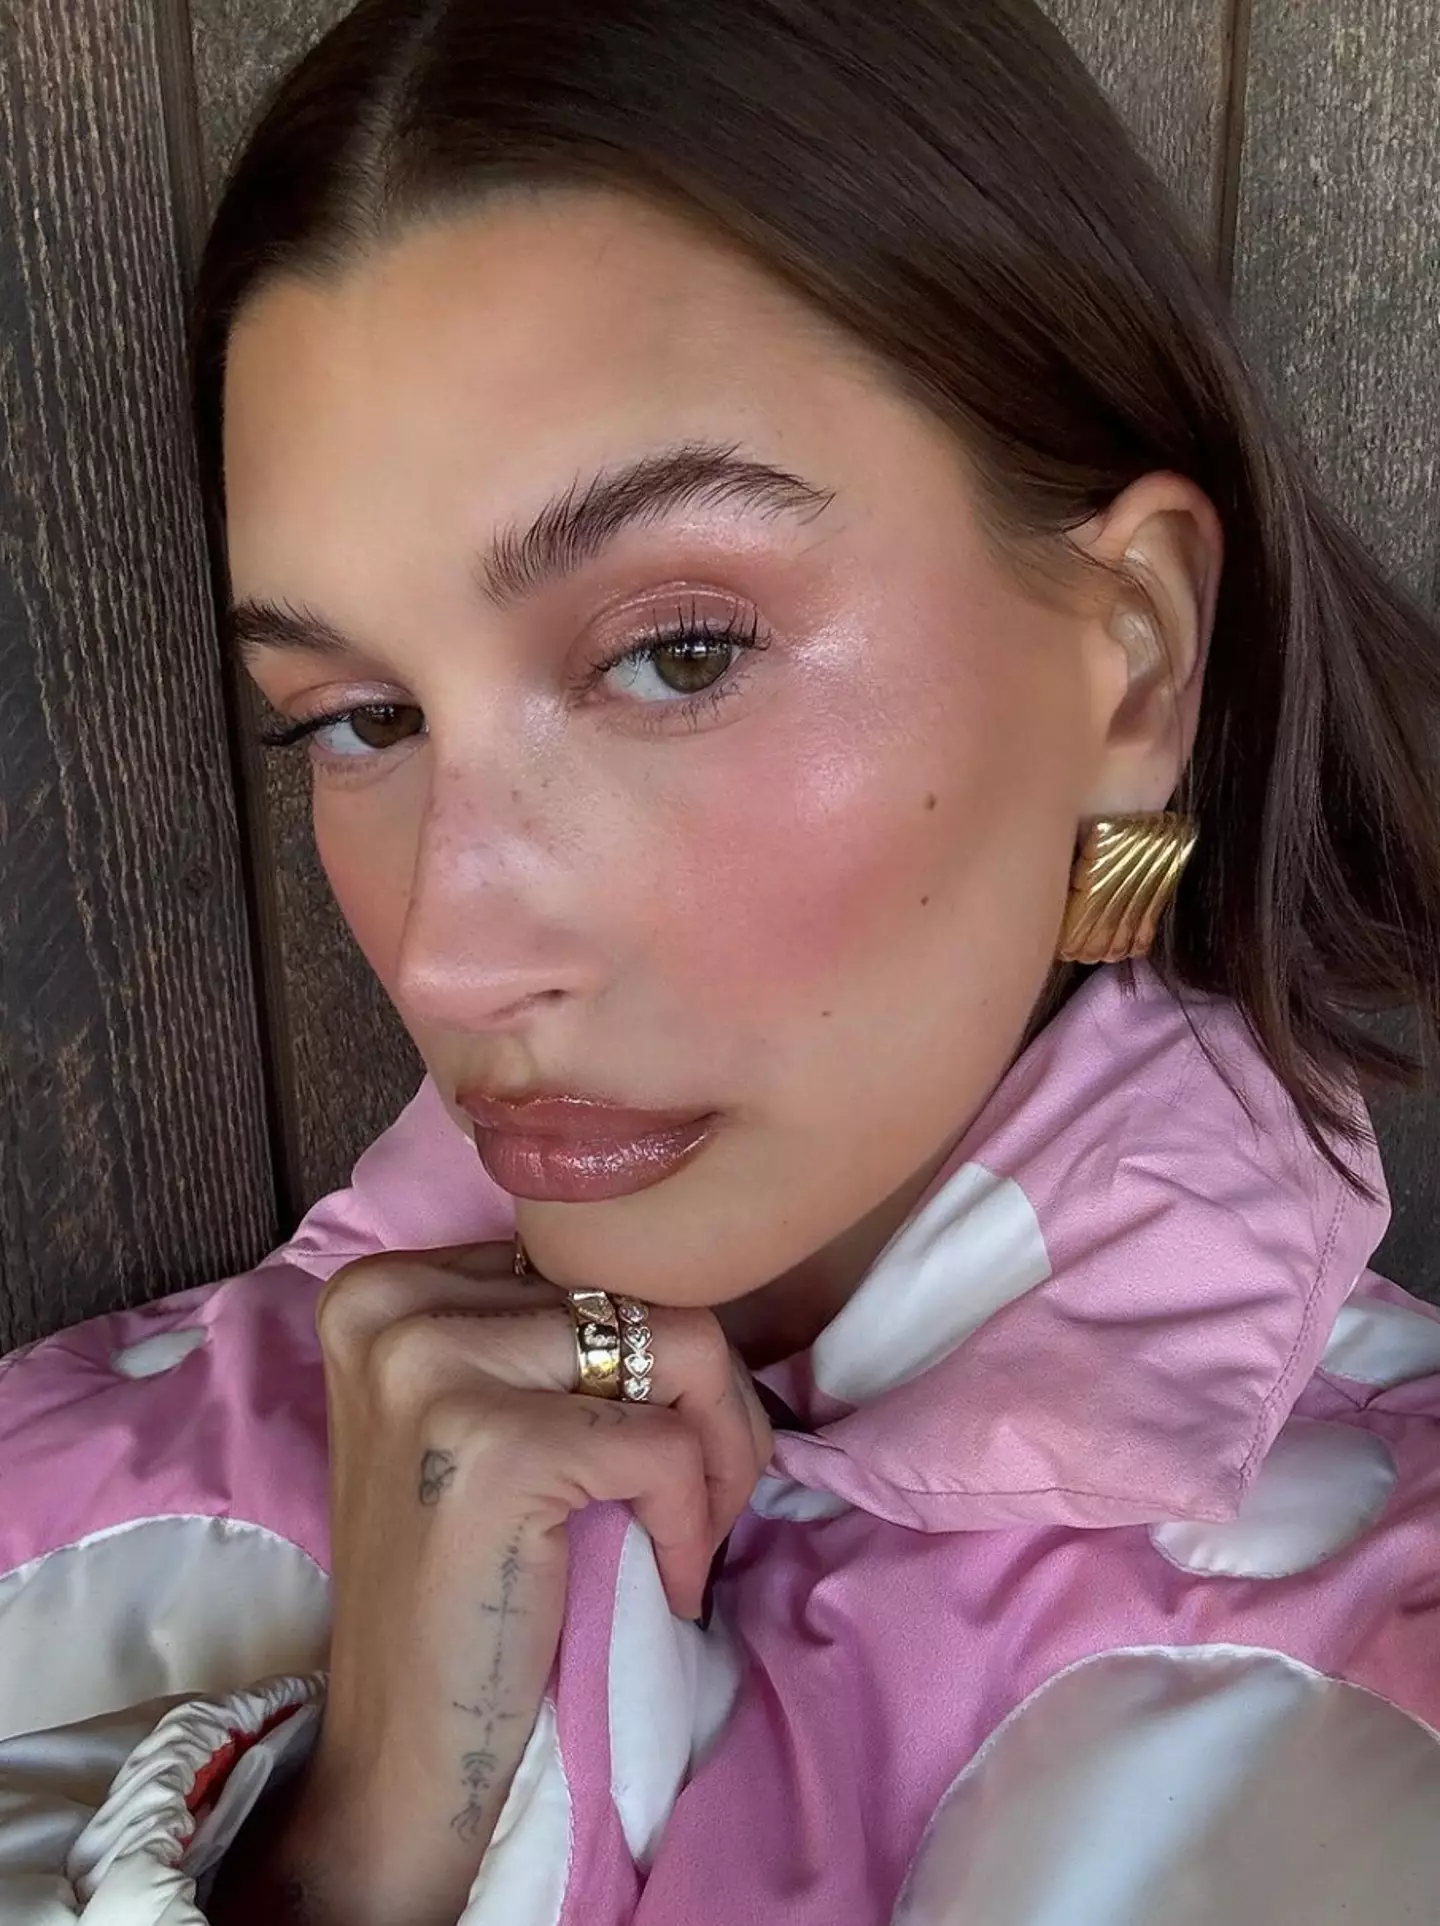 Fans questioned why Hailey Bieber was involved in the rant.